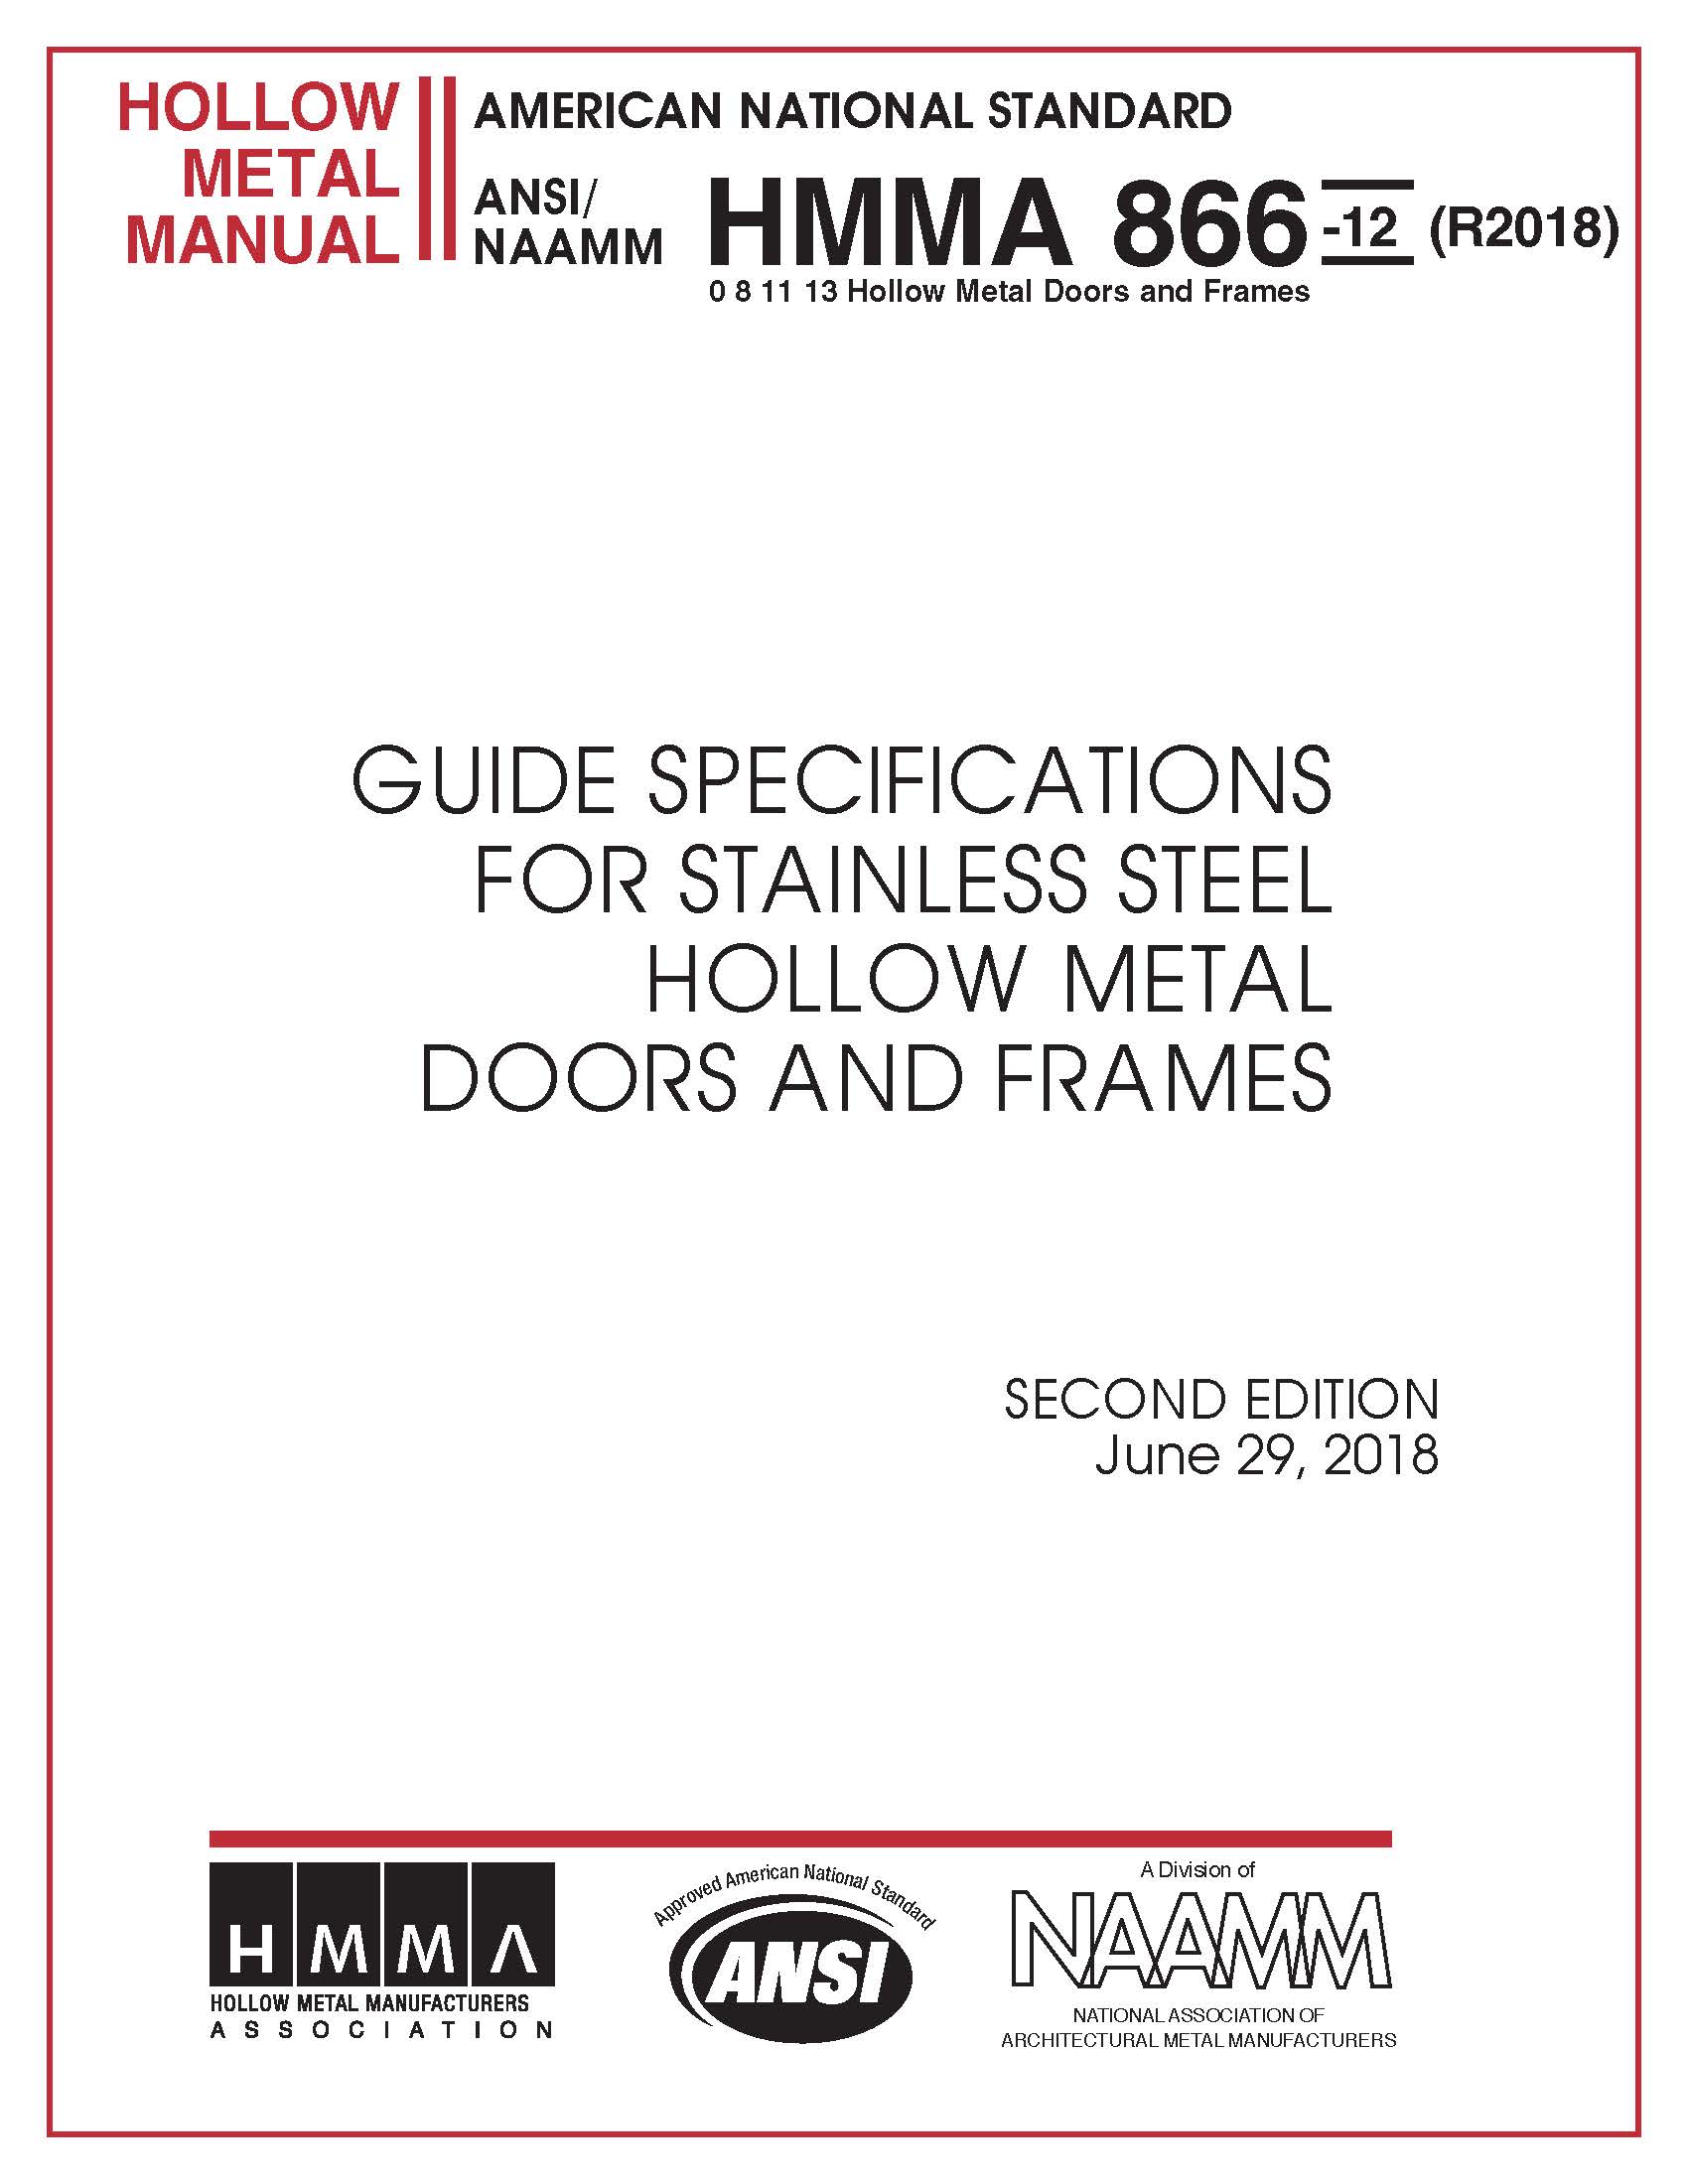 Guide Specifications for Stainless Steel Hollow Metal Doors and Frames